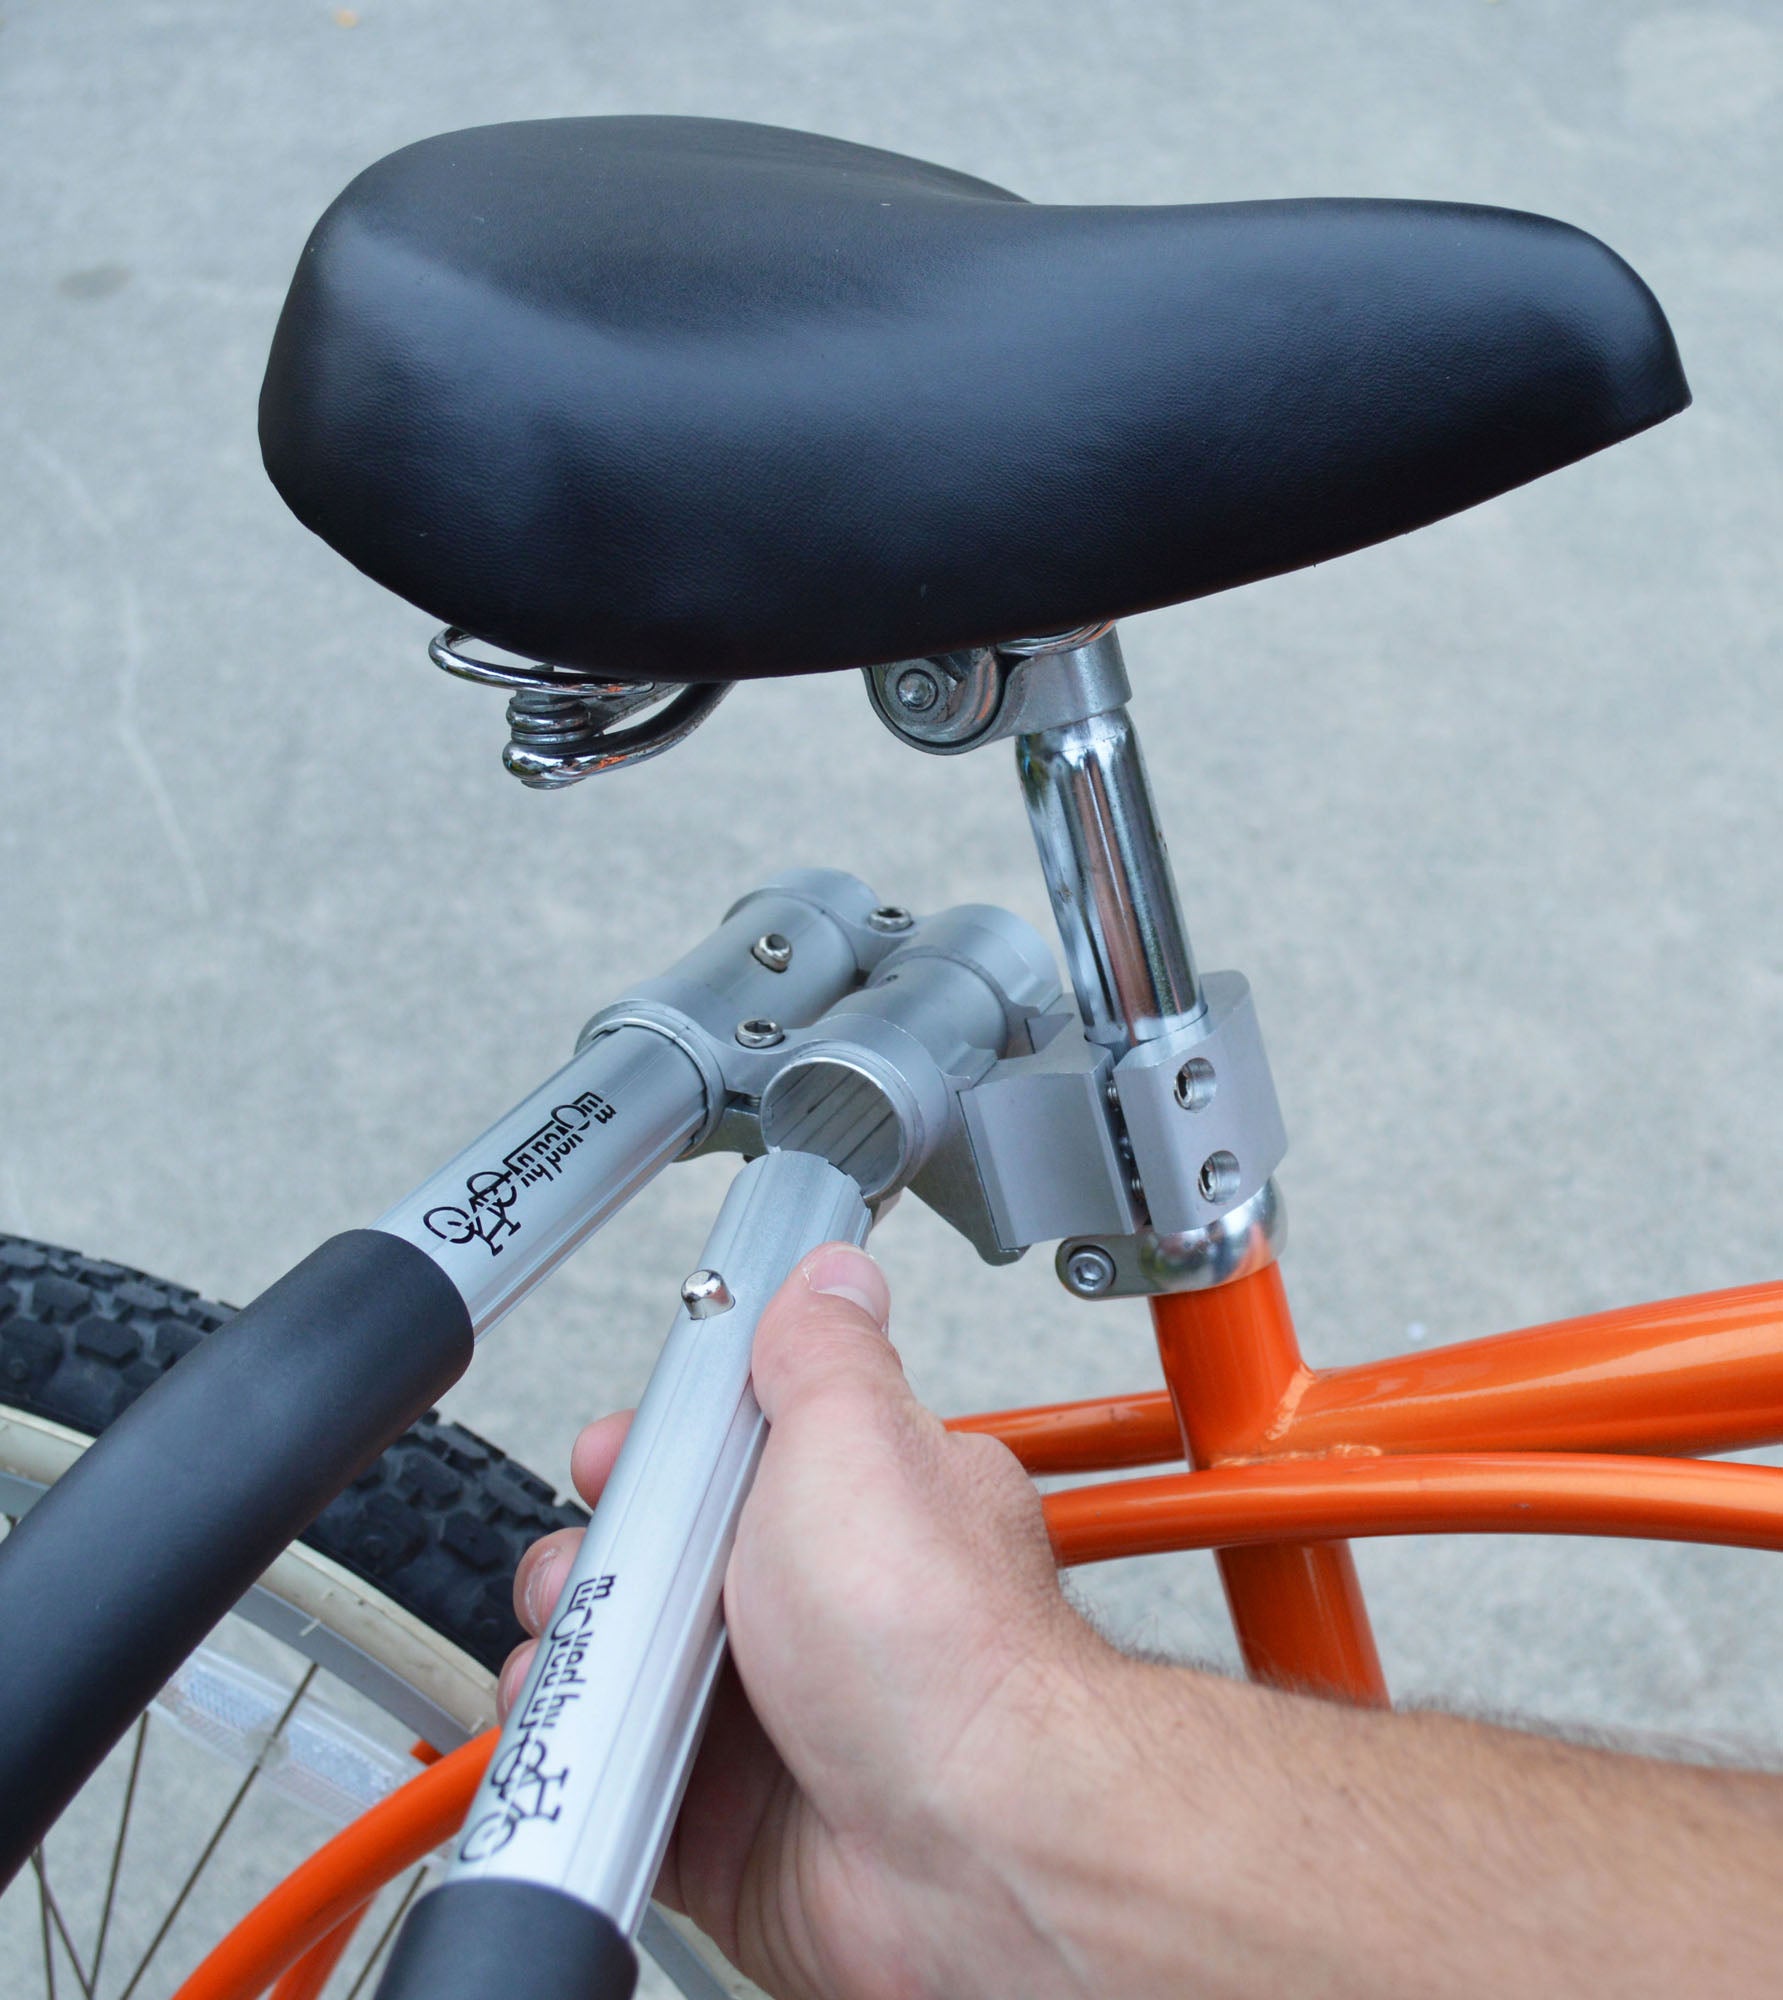 An orange bike with a seat mount for an MBB surfboard rack